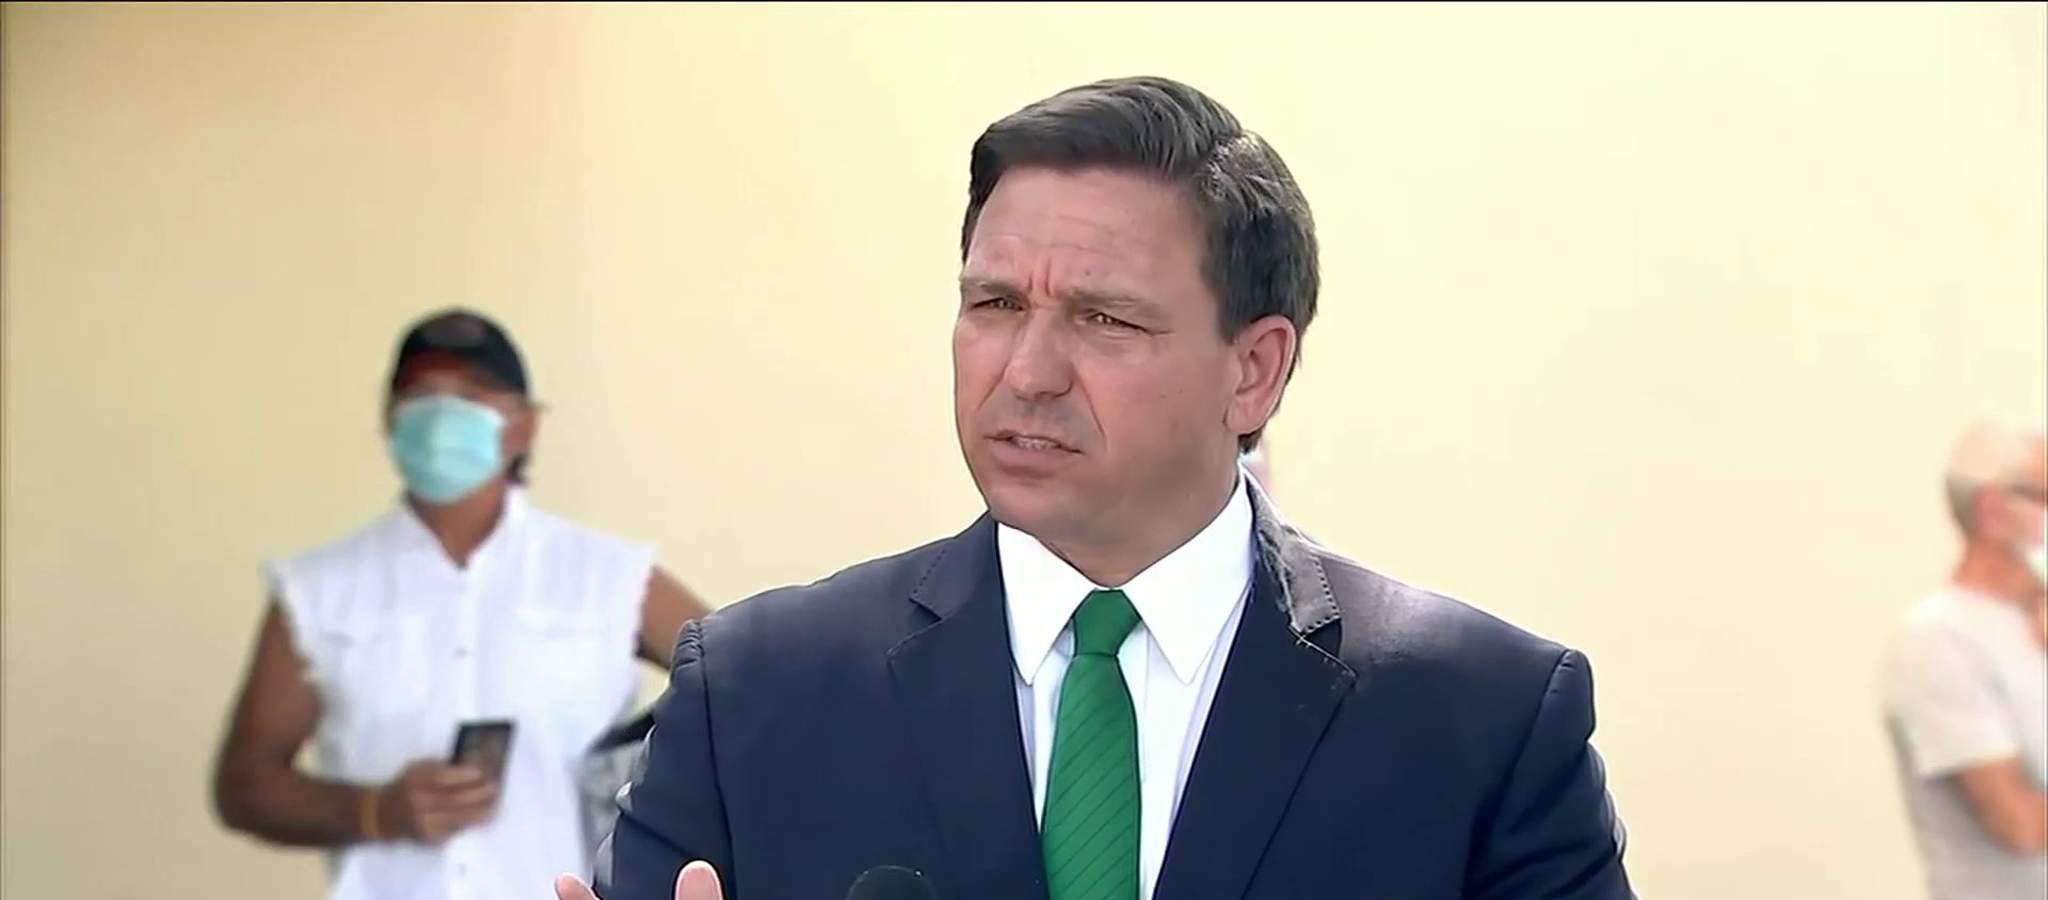 DeSantis lashes out at ‘critical race theory’ in push to overhaul Florida’s civics curriculum